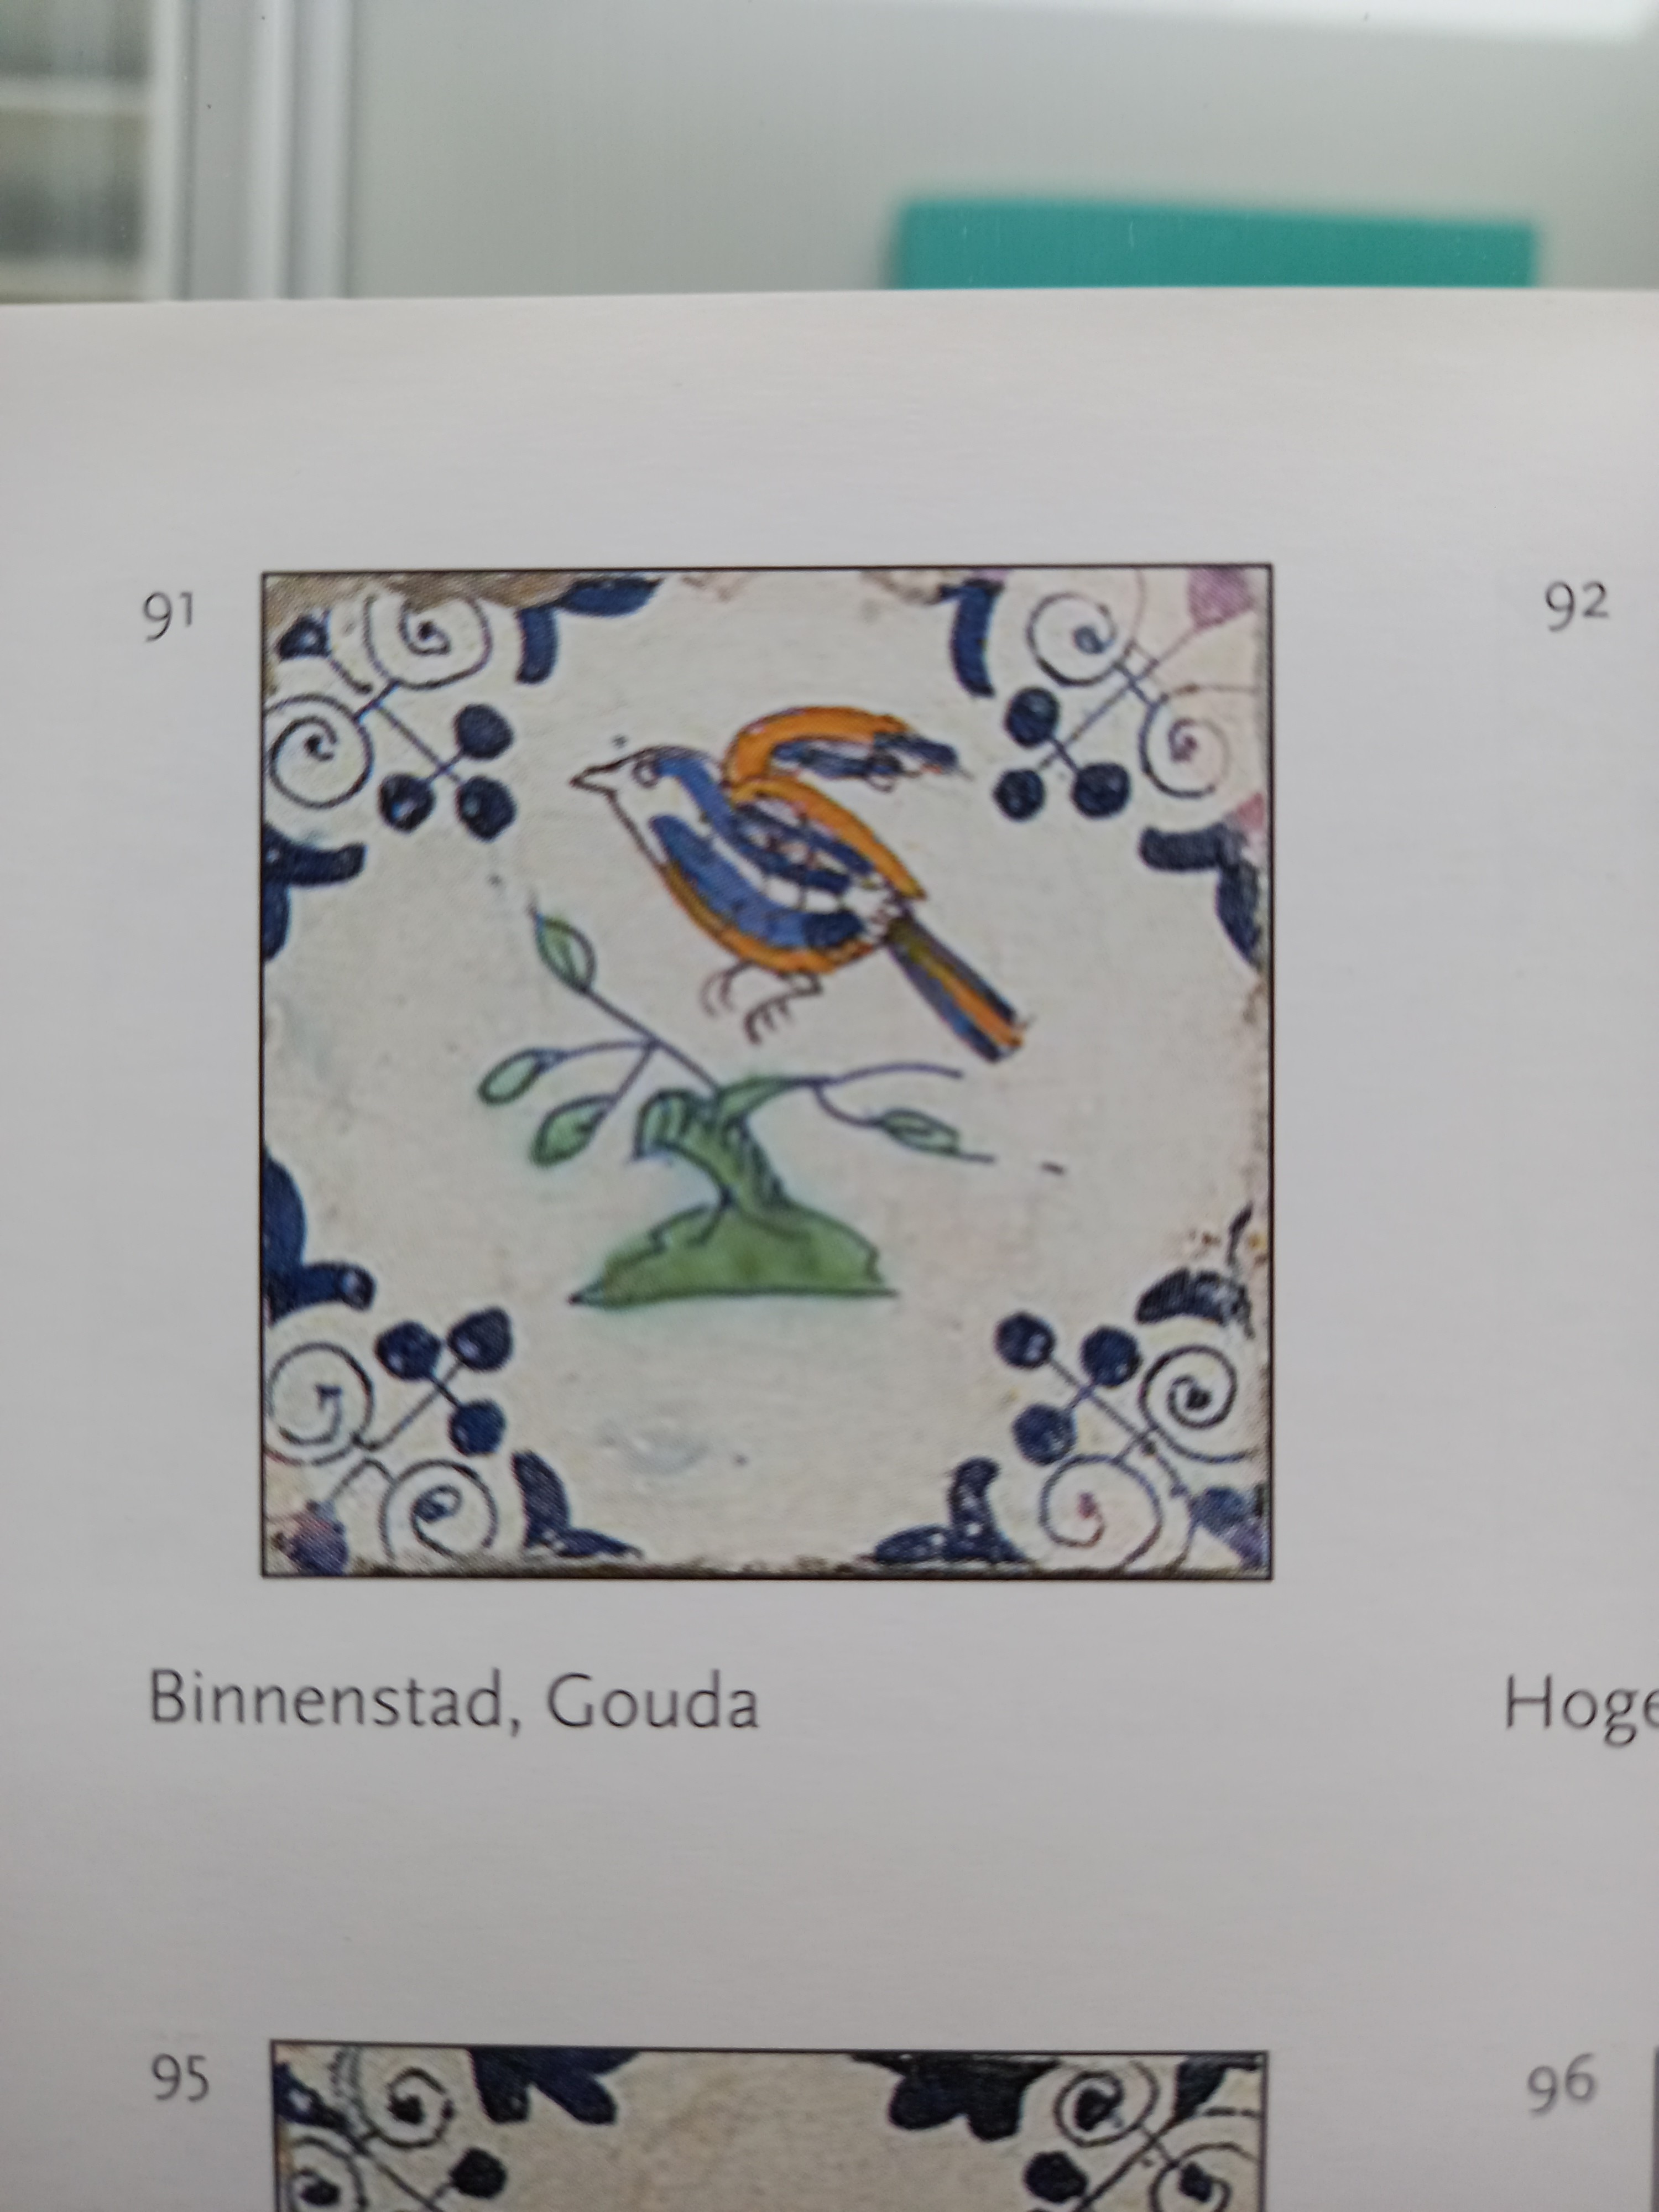 Tiles with birds painted according to the same design (but a different corner motif) have been found in the center of Gouda